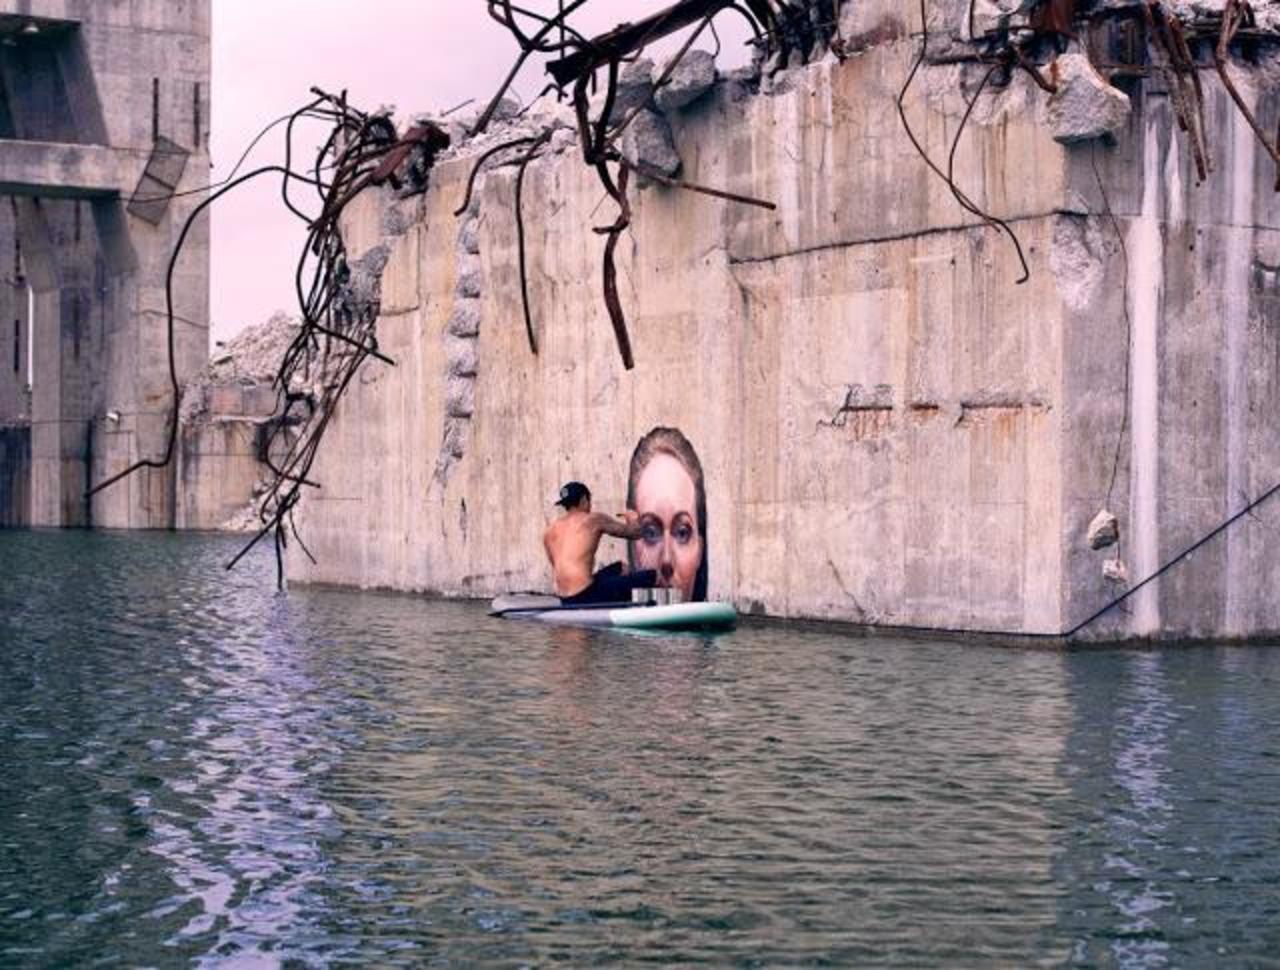 love the way artist sean yoro's murals seem to rise out of the ocean! http://ow.ly/NyifF #art #mural #portrait http://t.co/4s2y5Vfn5R